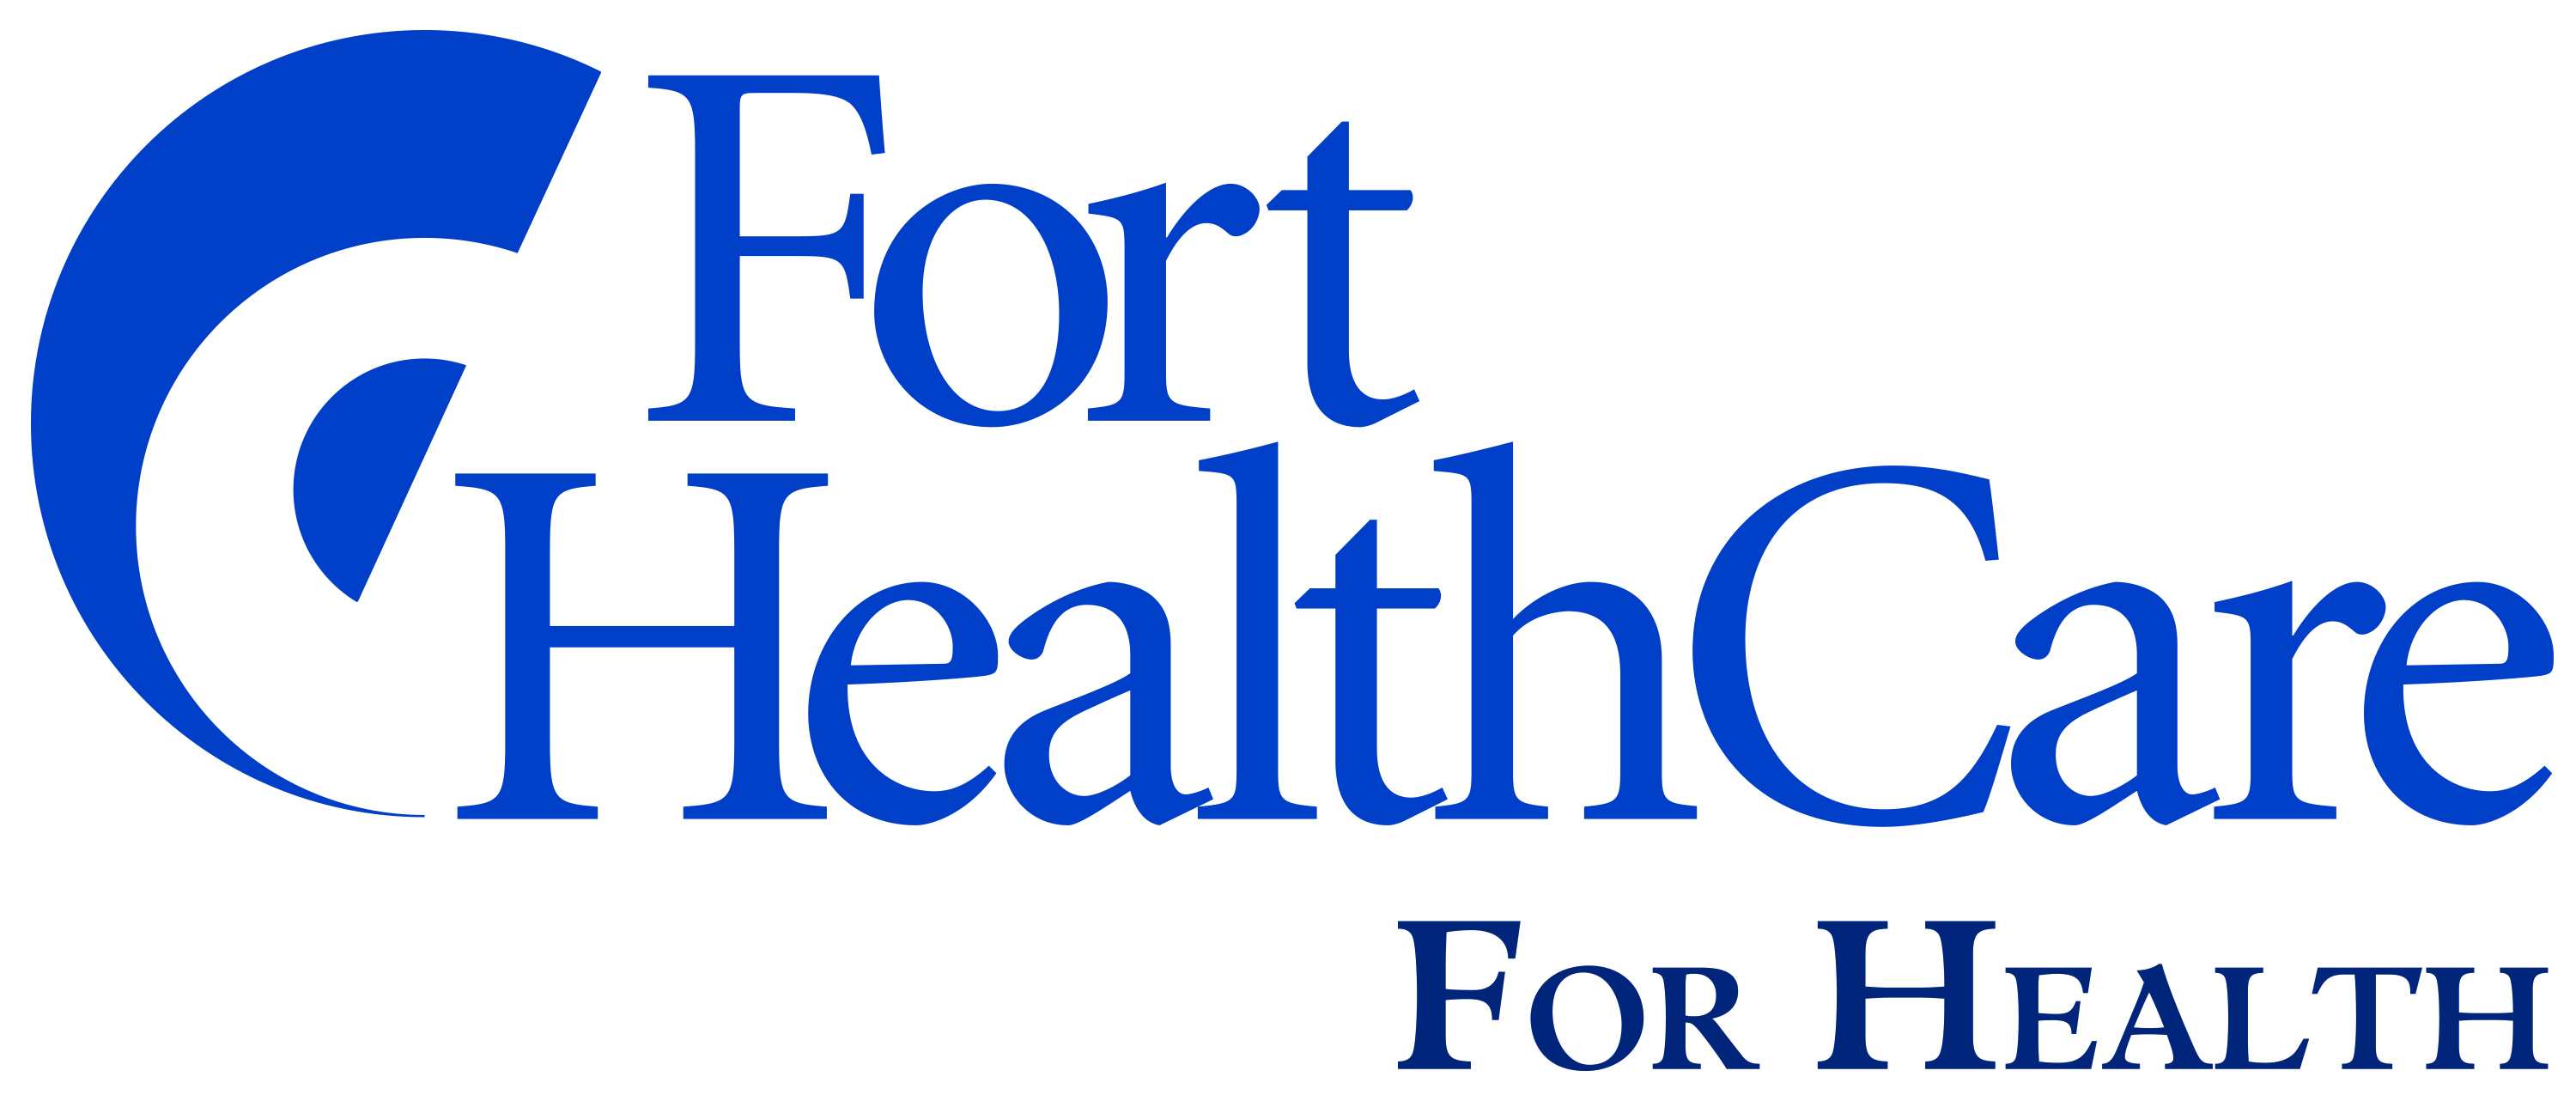 Fort Healthcare 75th